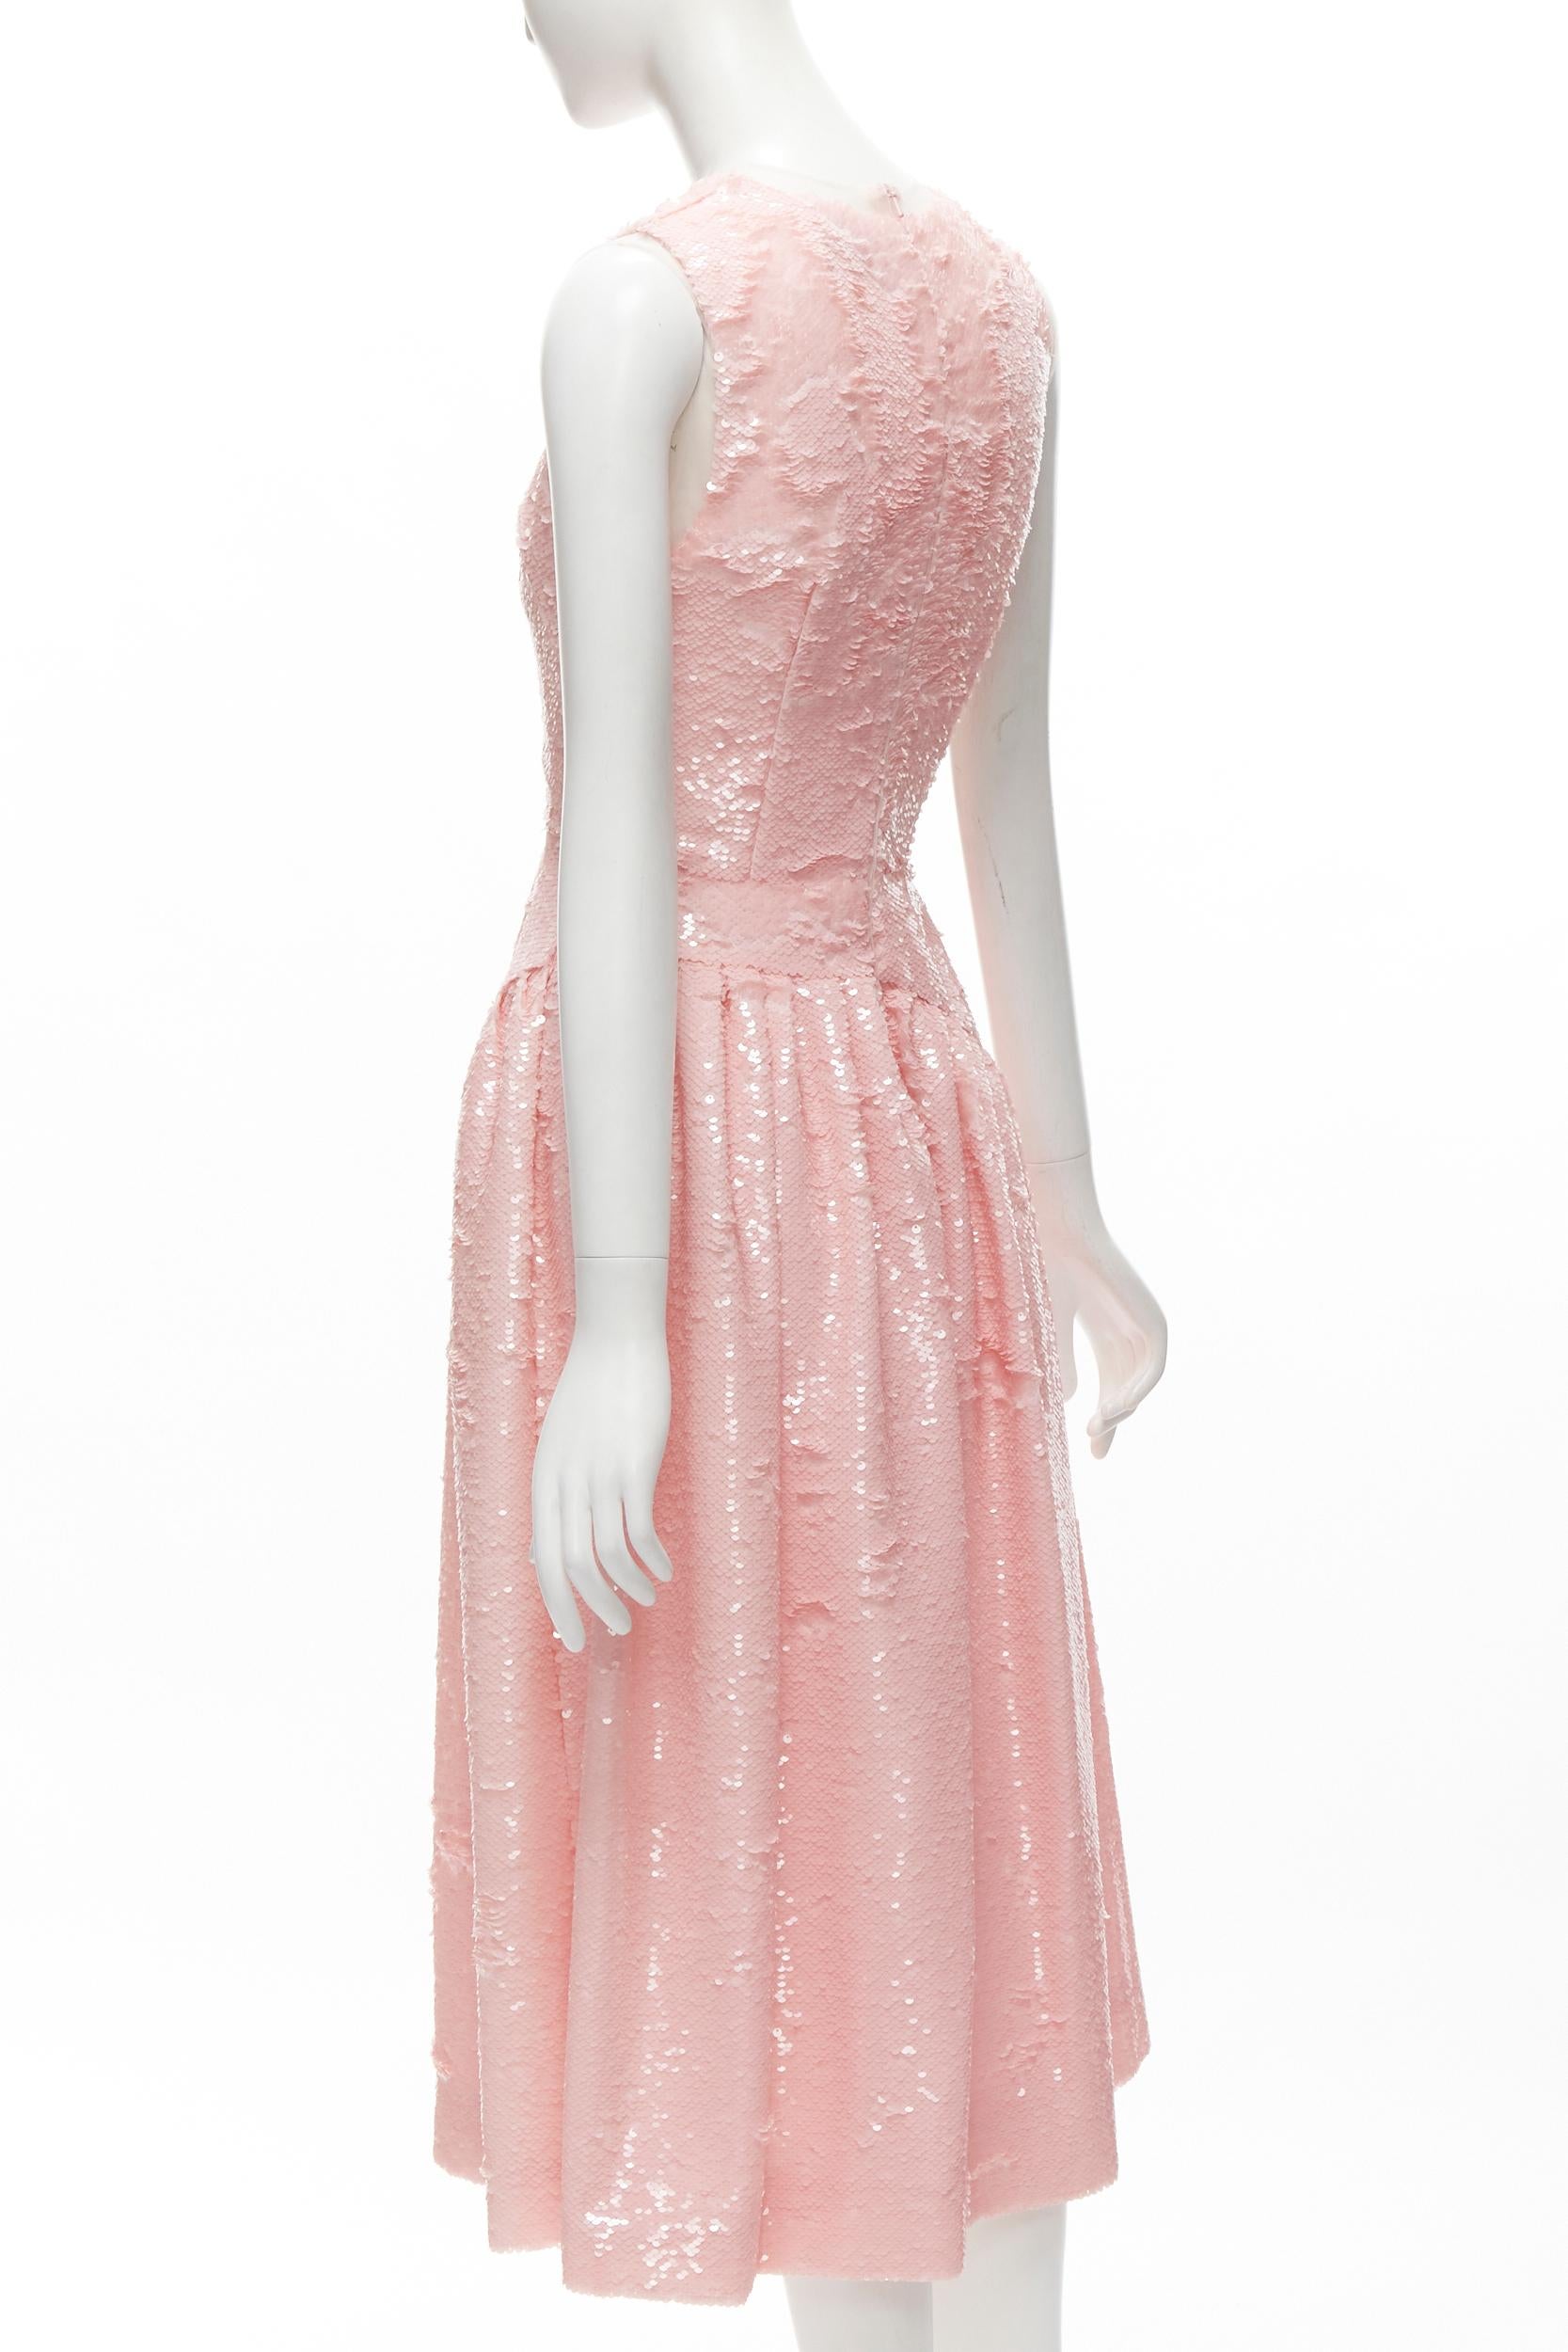 SIMONE ROCHA 2019 Runway blush pink sequins dropped seam midi dress UK6 XS In Excellent Condition For Sale In Hong Kong, NT